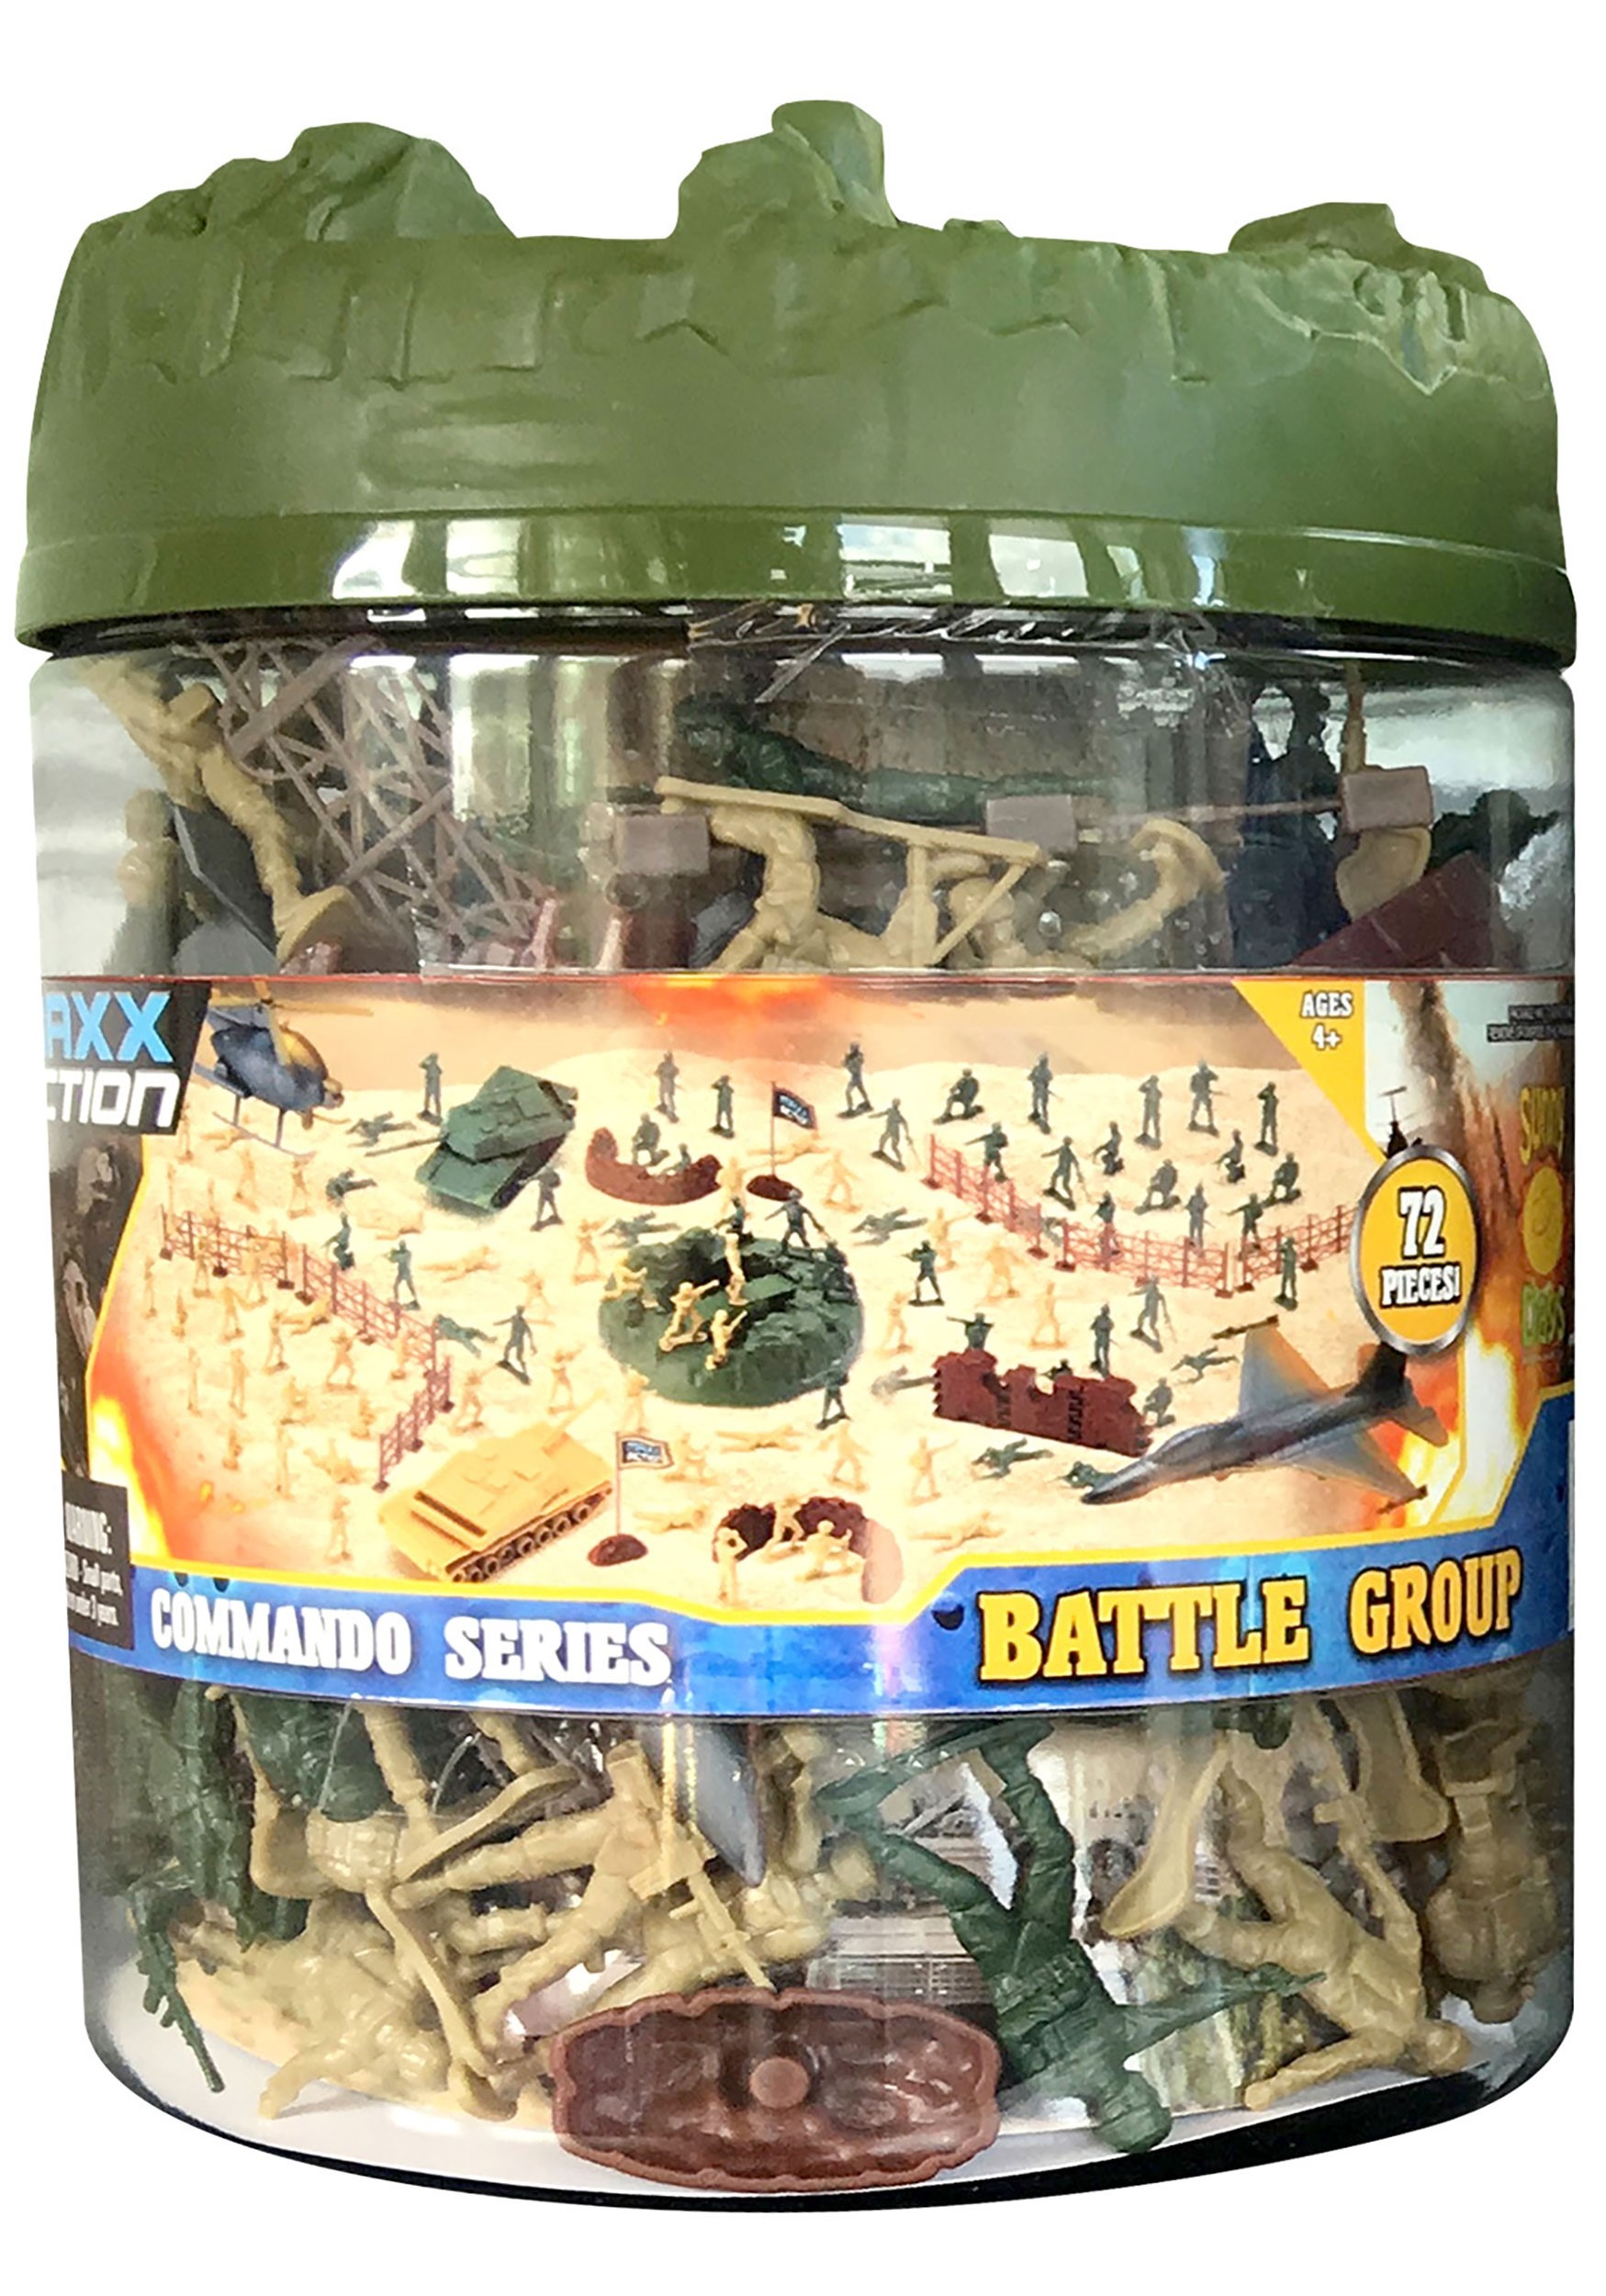 Commando Series Battle Group Bucket | Army Toy Figures